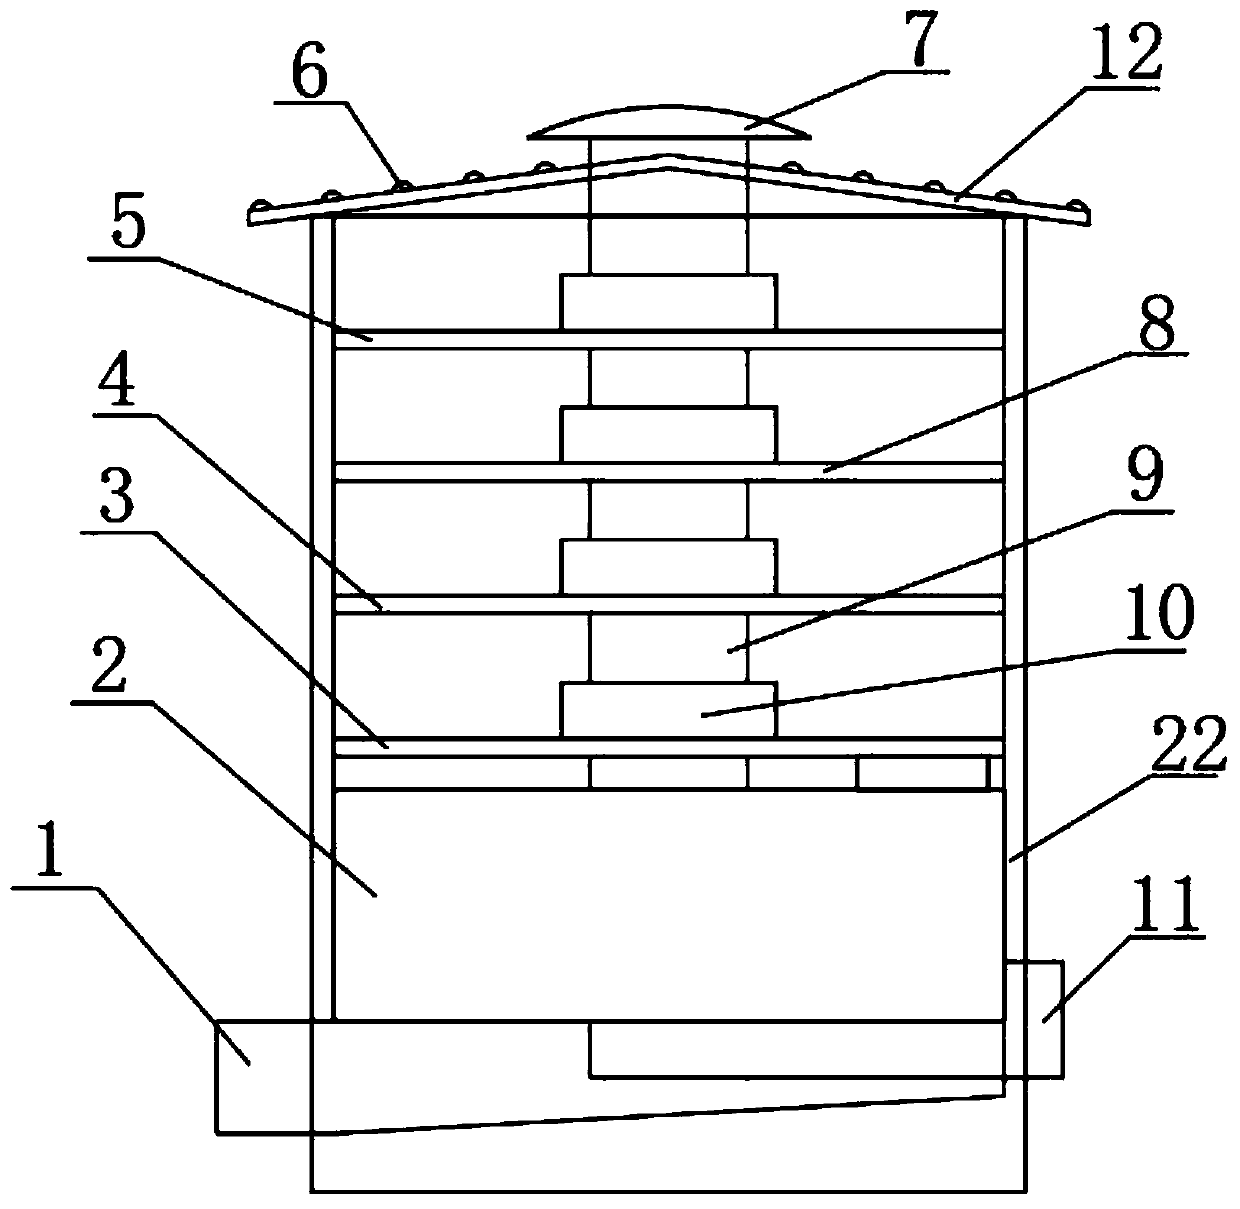 Wastewater purification treatment device